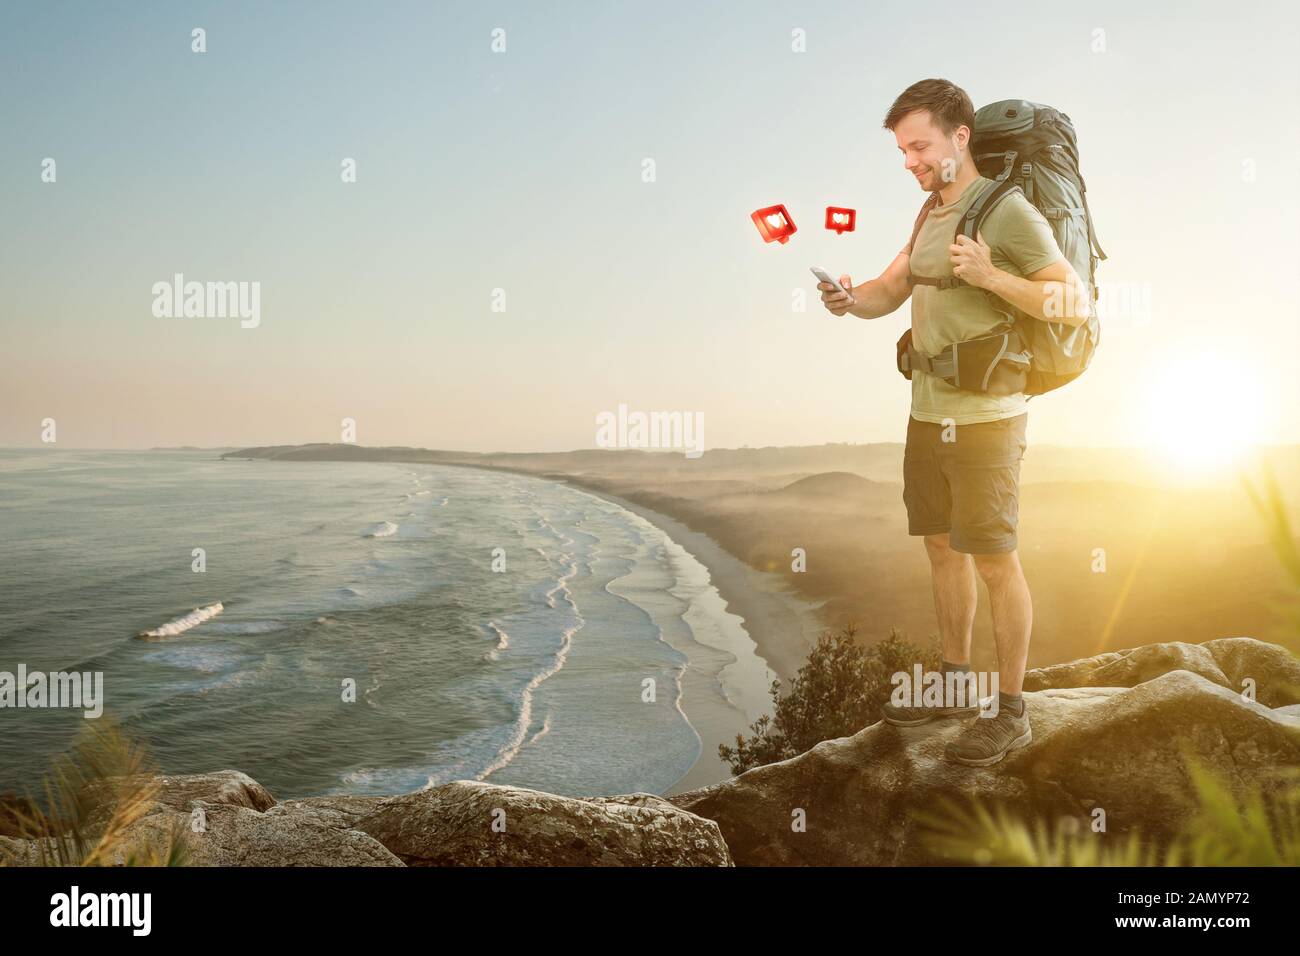 Hiker in front of a beautiful coastline is using a smartphone Stock Photo